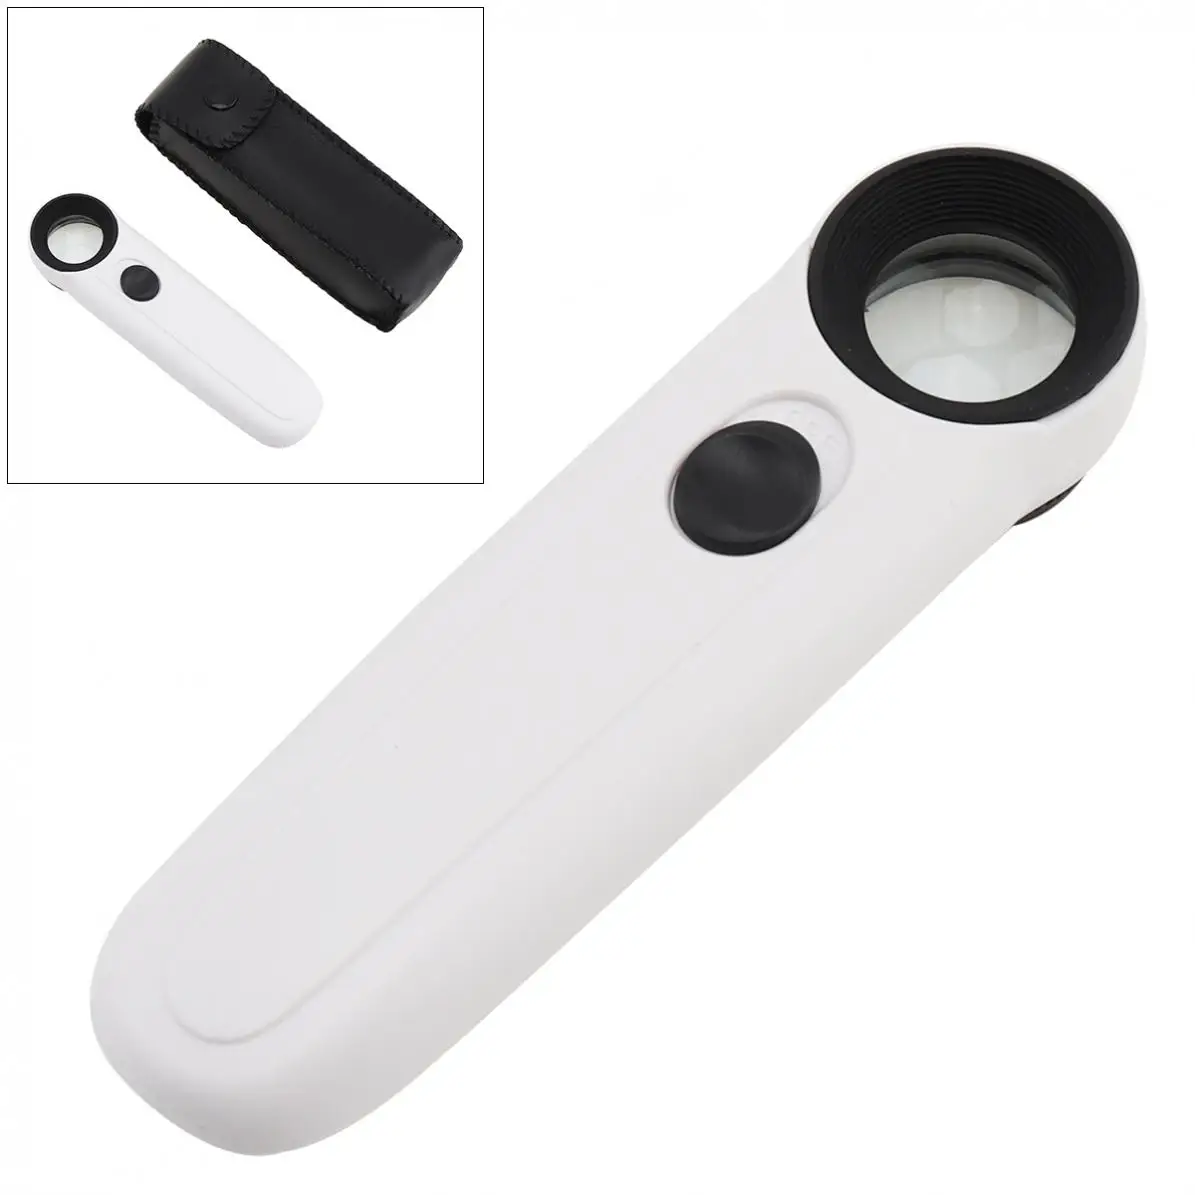 

40X 21MM Hand-Hold Magnifier (Exclamation Mark Type) with Two LED Light for Watch Repairing / Face skin examination / Manicuring